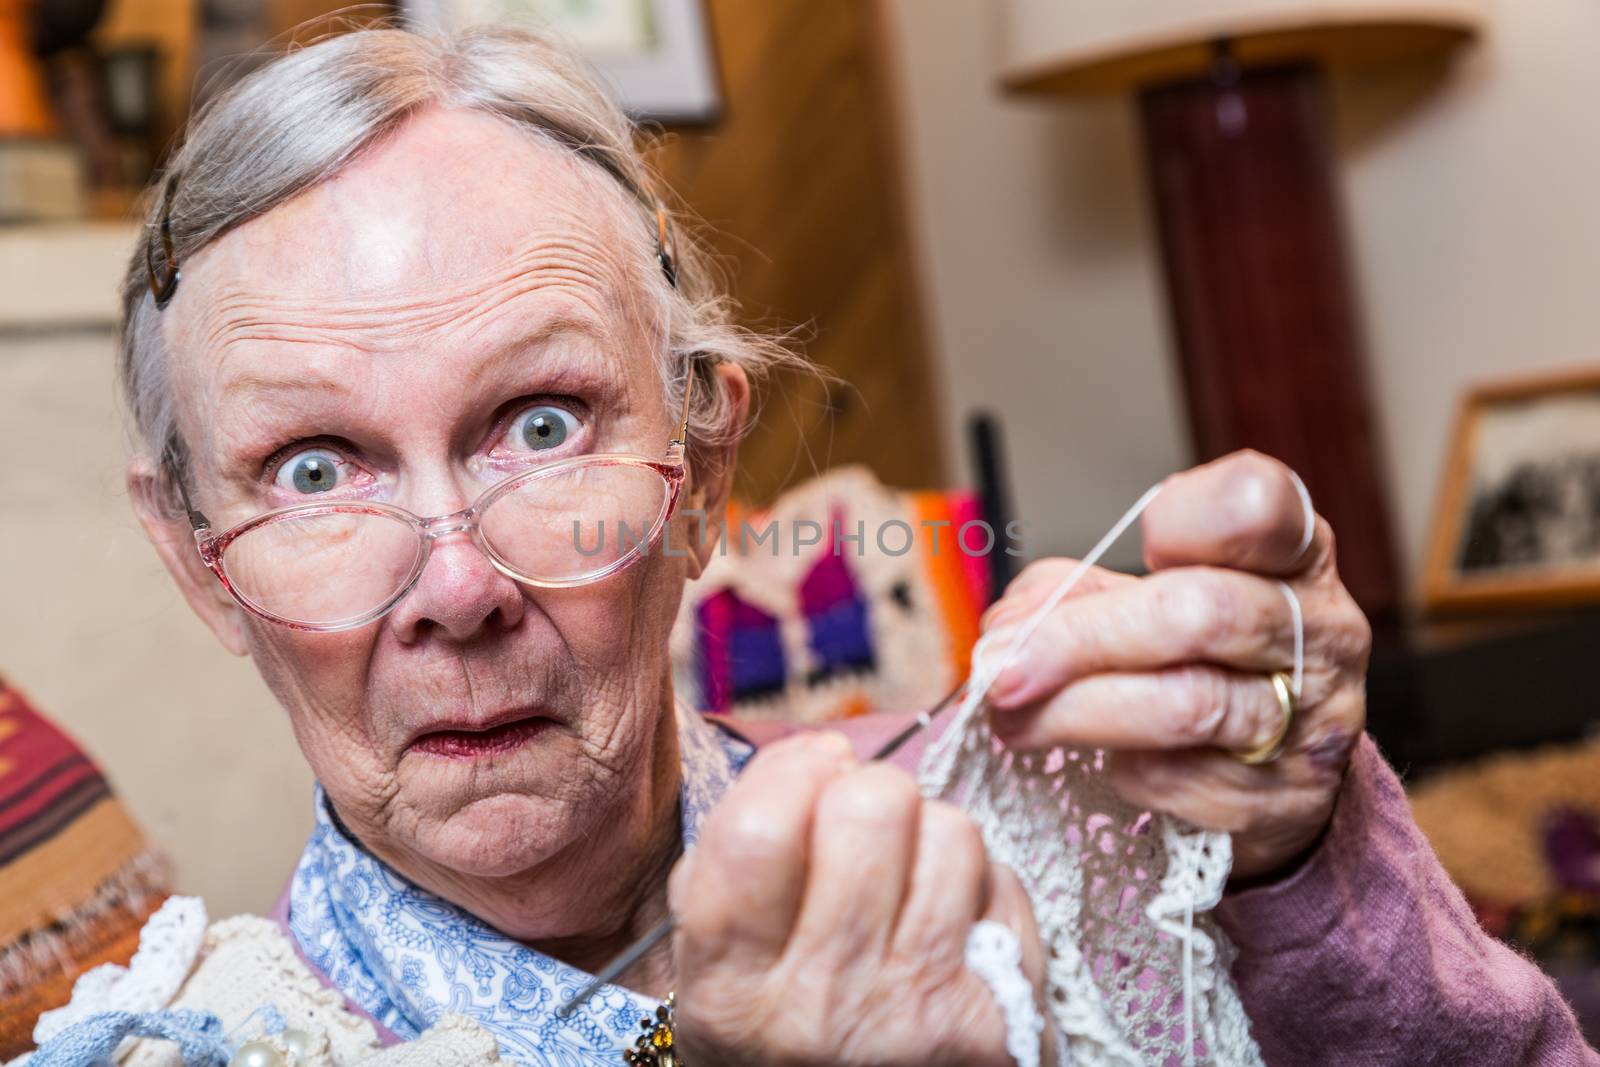 Elderly woman crocheting while looking at camera